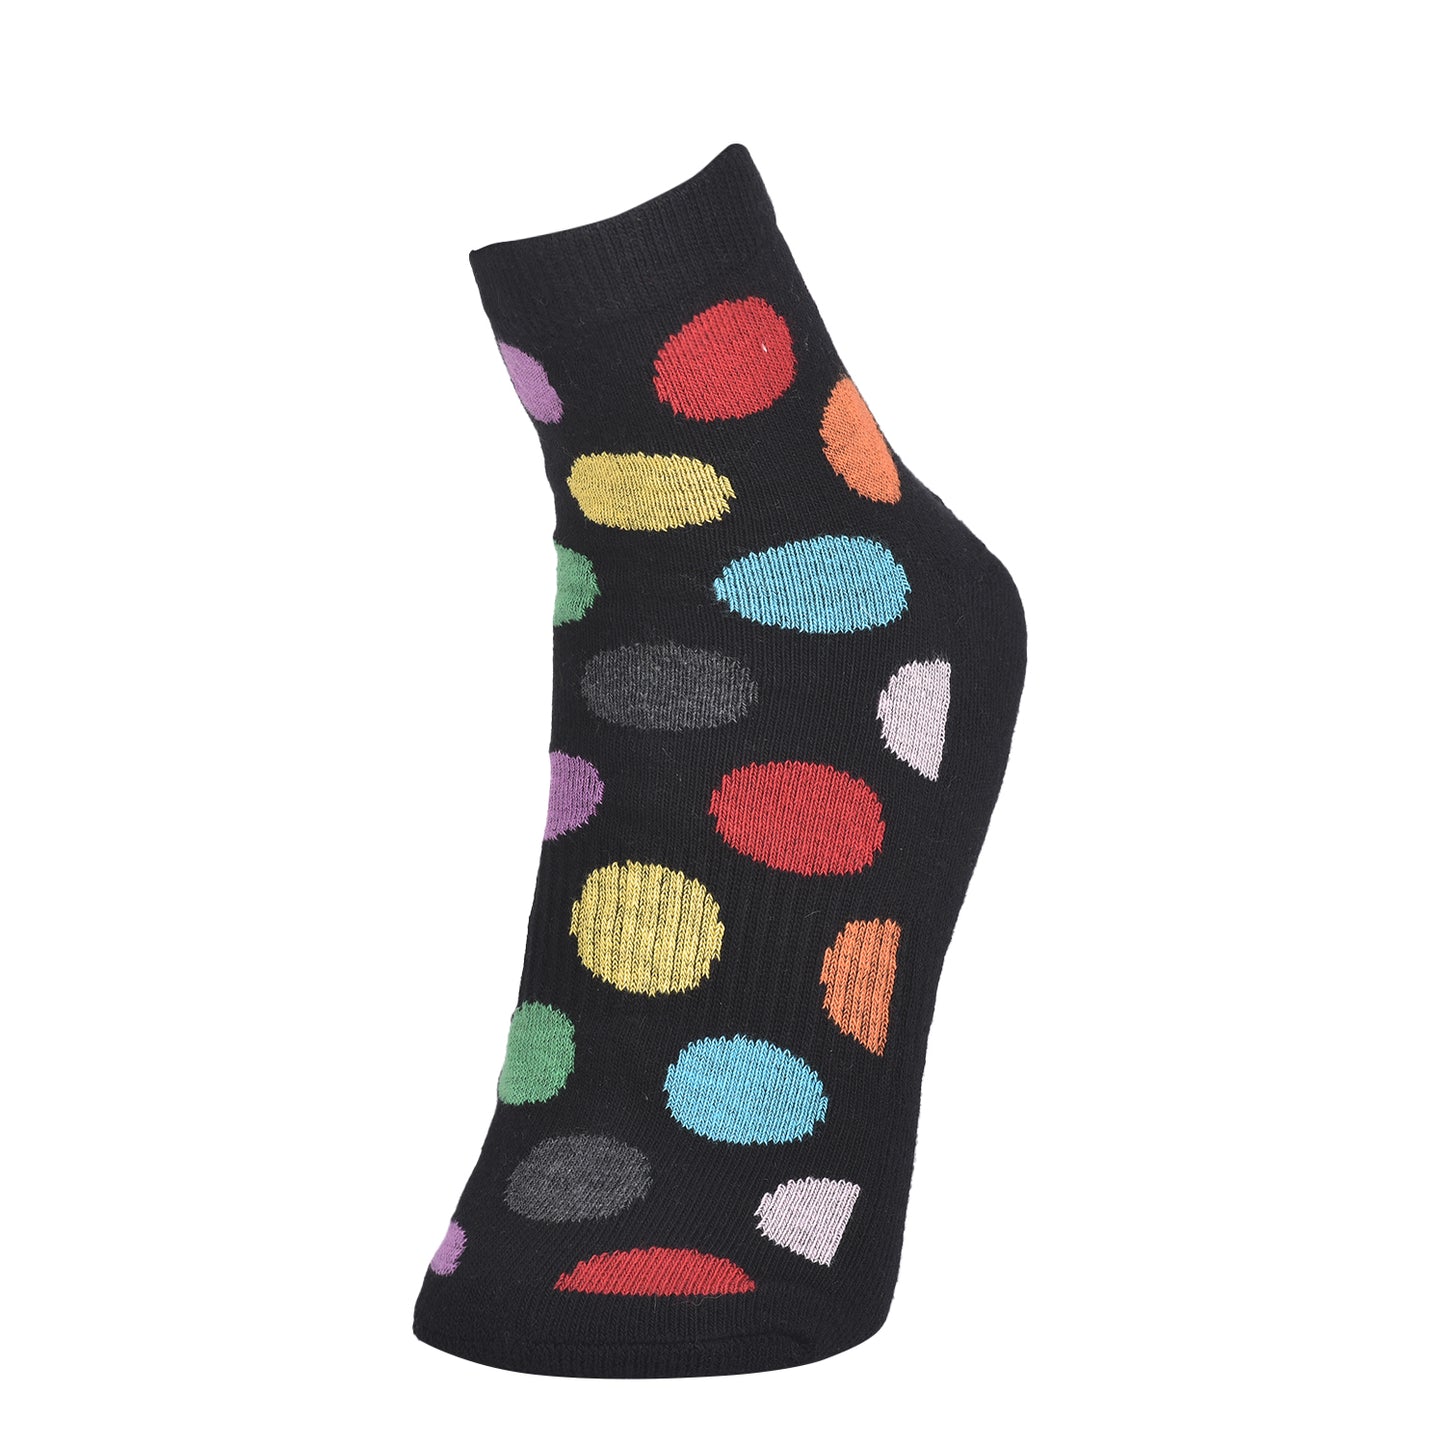 Unisex Ankle Cotton Socks Navy, Grey And Black Polka Dots Design - Pack of 3